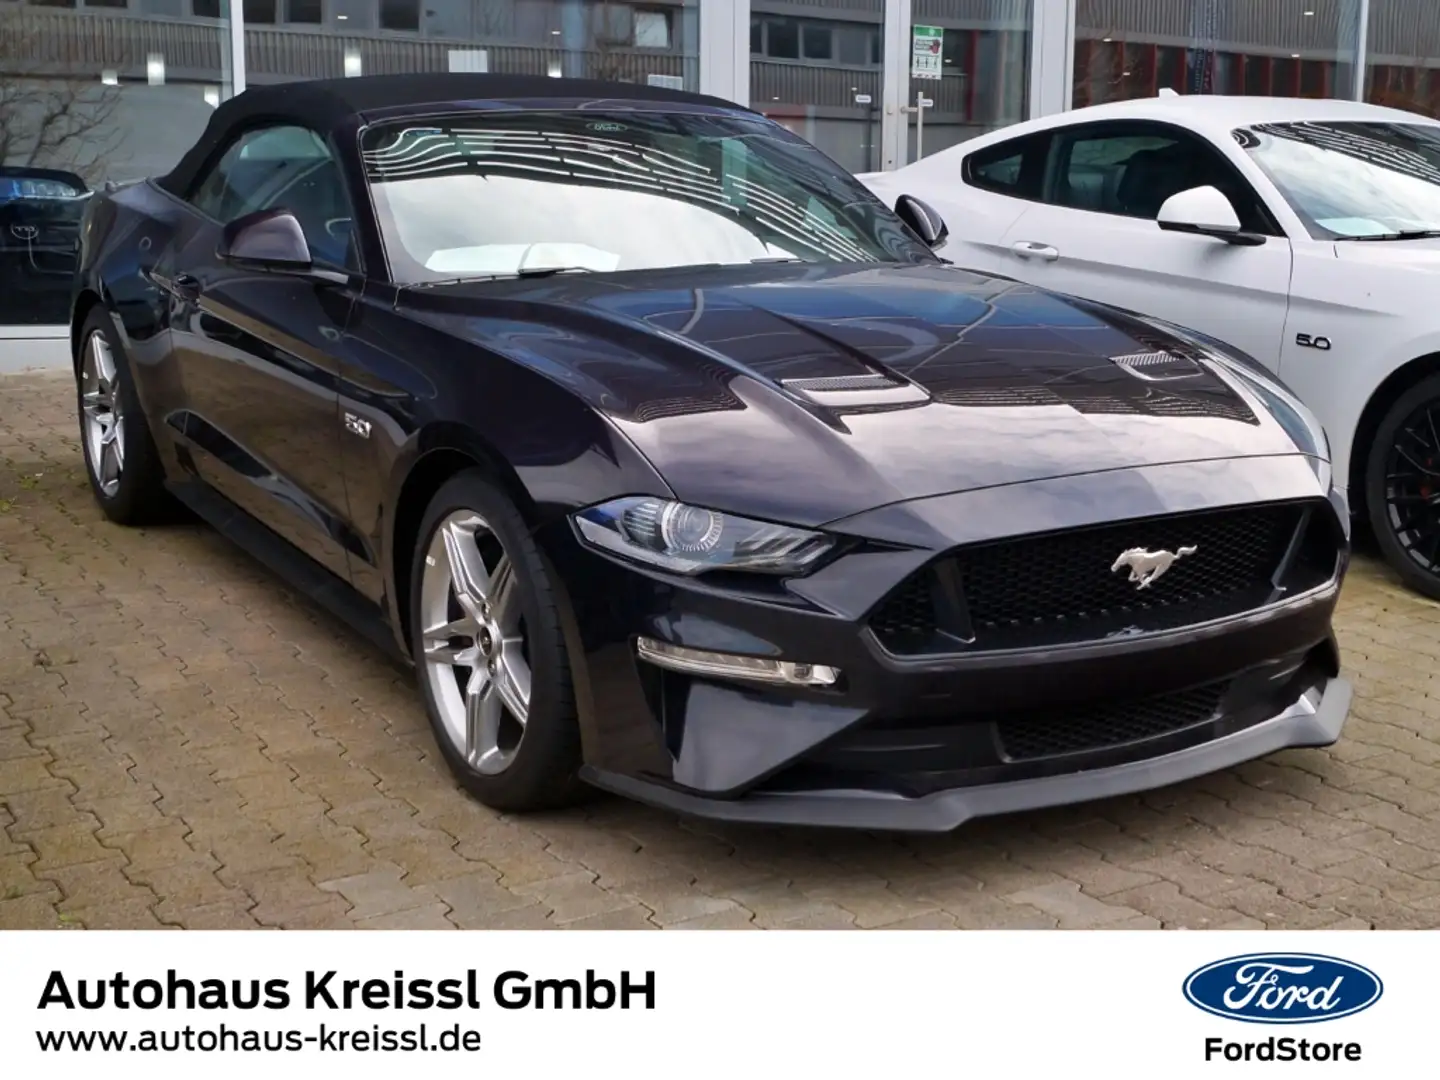 Ford Mustang Convertible GT 5.0 V8 Automatik MagneRide Burdeos - 2